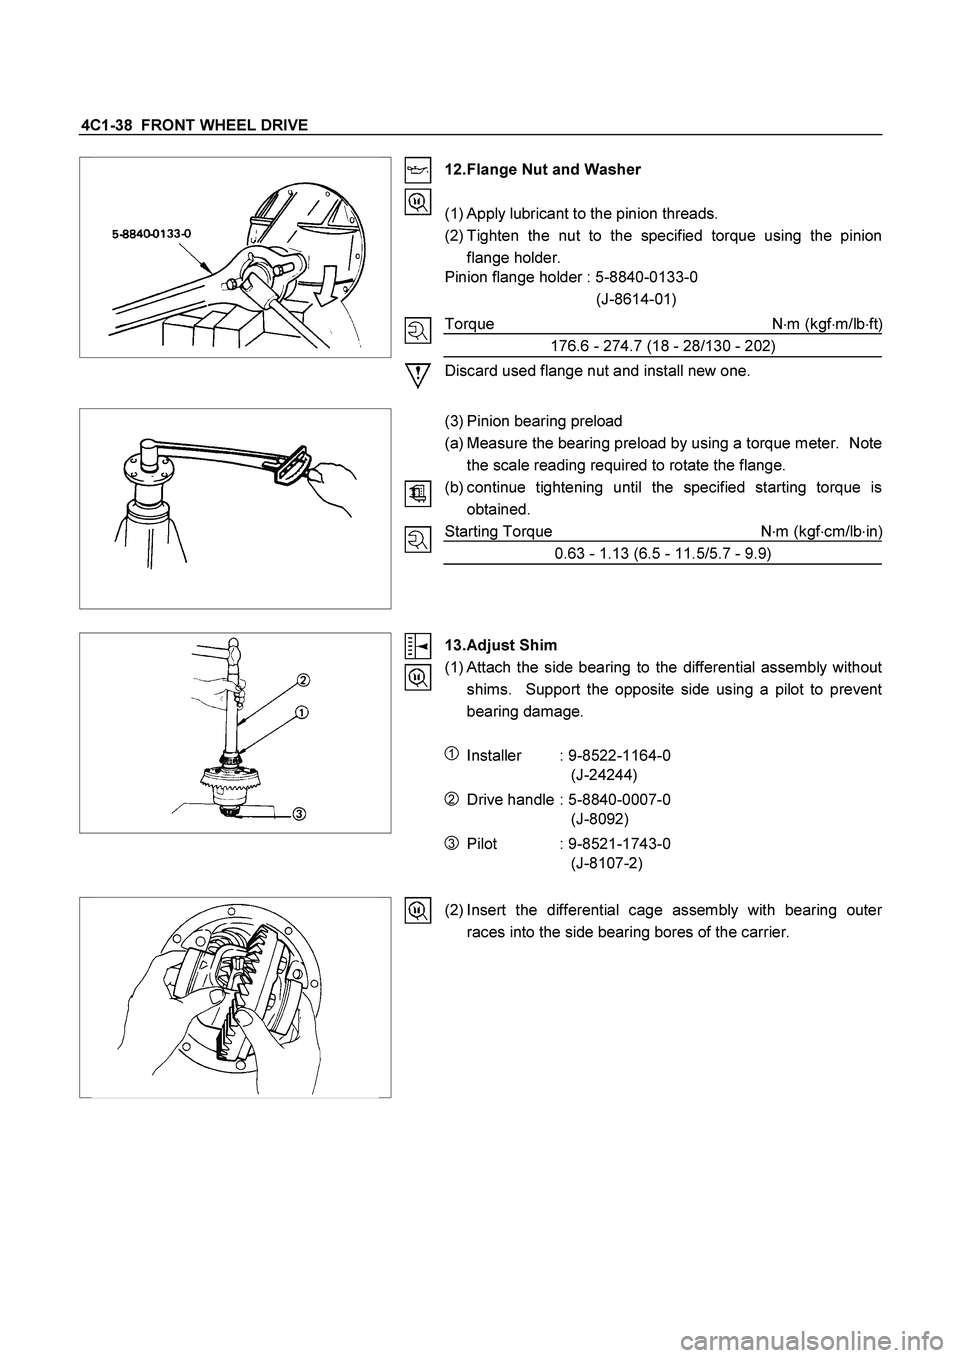 ISUZU TF SERIES 2004  Workshop Manual 4C1-38  FRONT WHEEL DRIVE 
  
 
 
 
 
 
 12. Flange Nut and Washer 
 
(1) Apply lubricant to the pinion threads. 
(2) Tighten the nut to the specified torque using the pinion
flange holder. 
Pinion fl